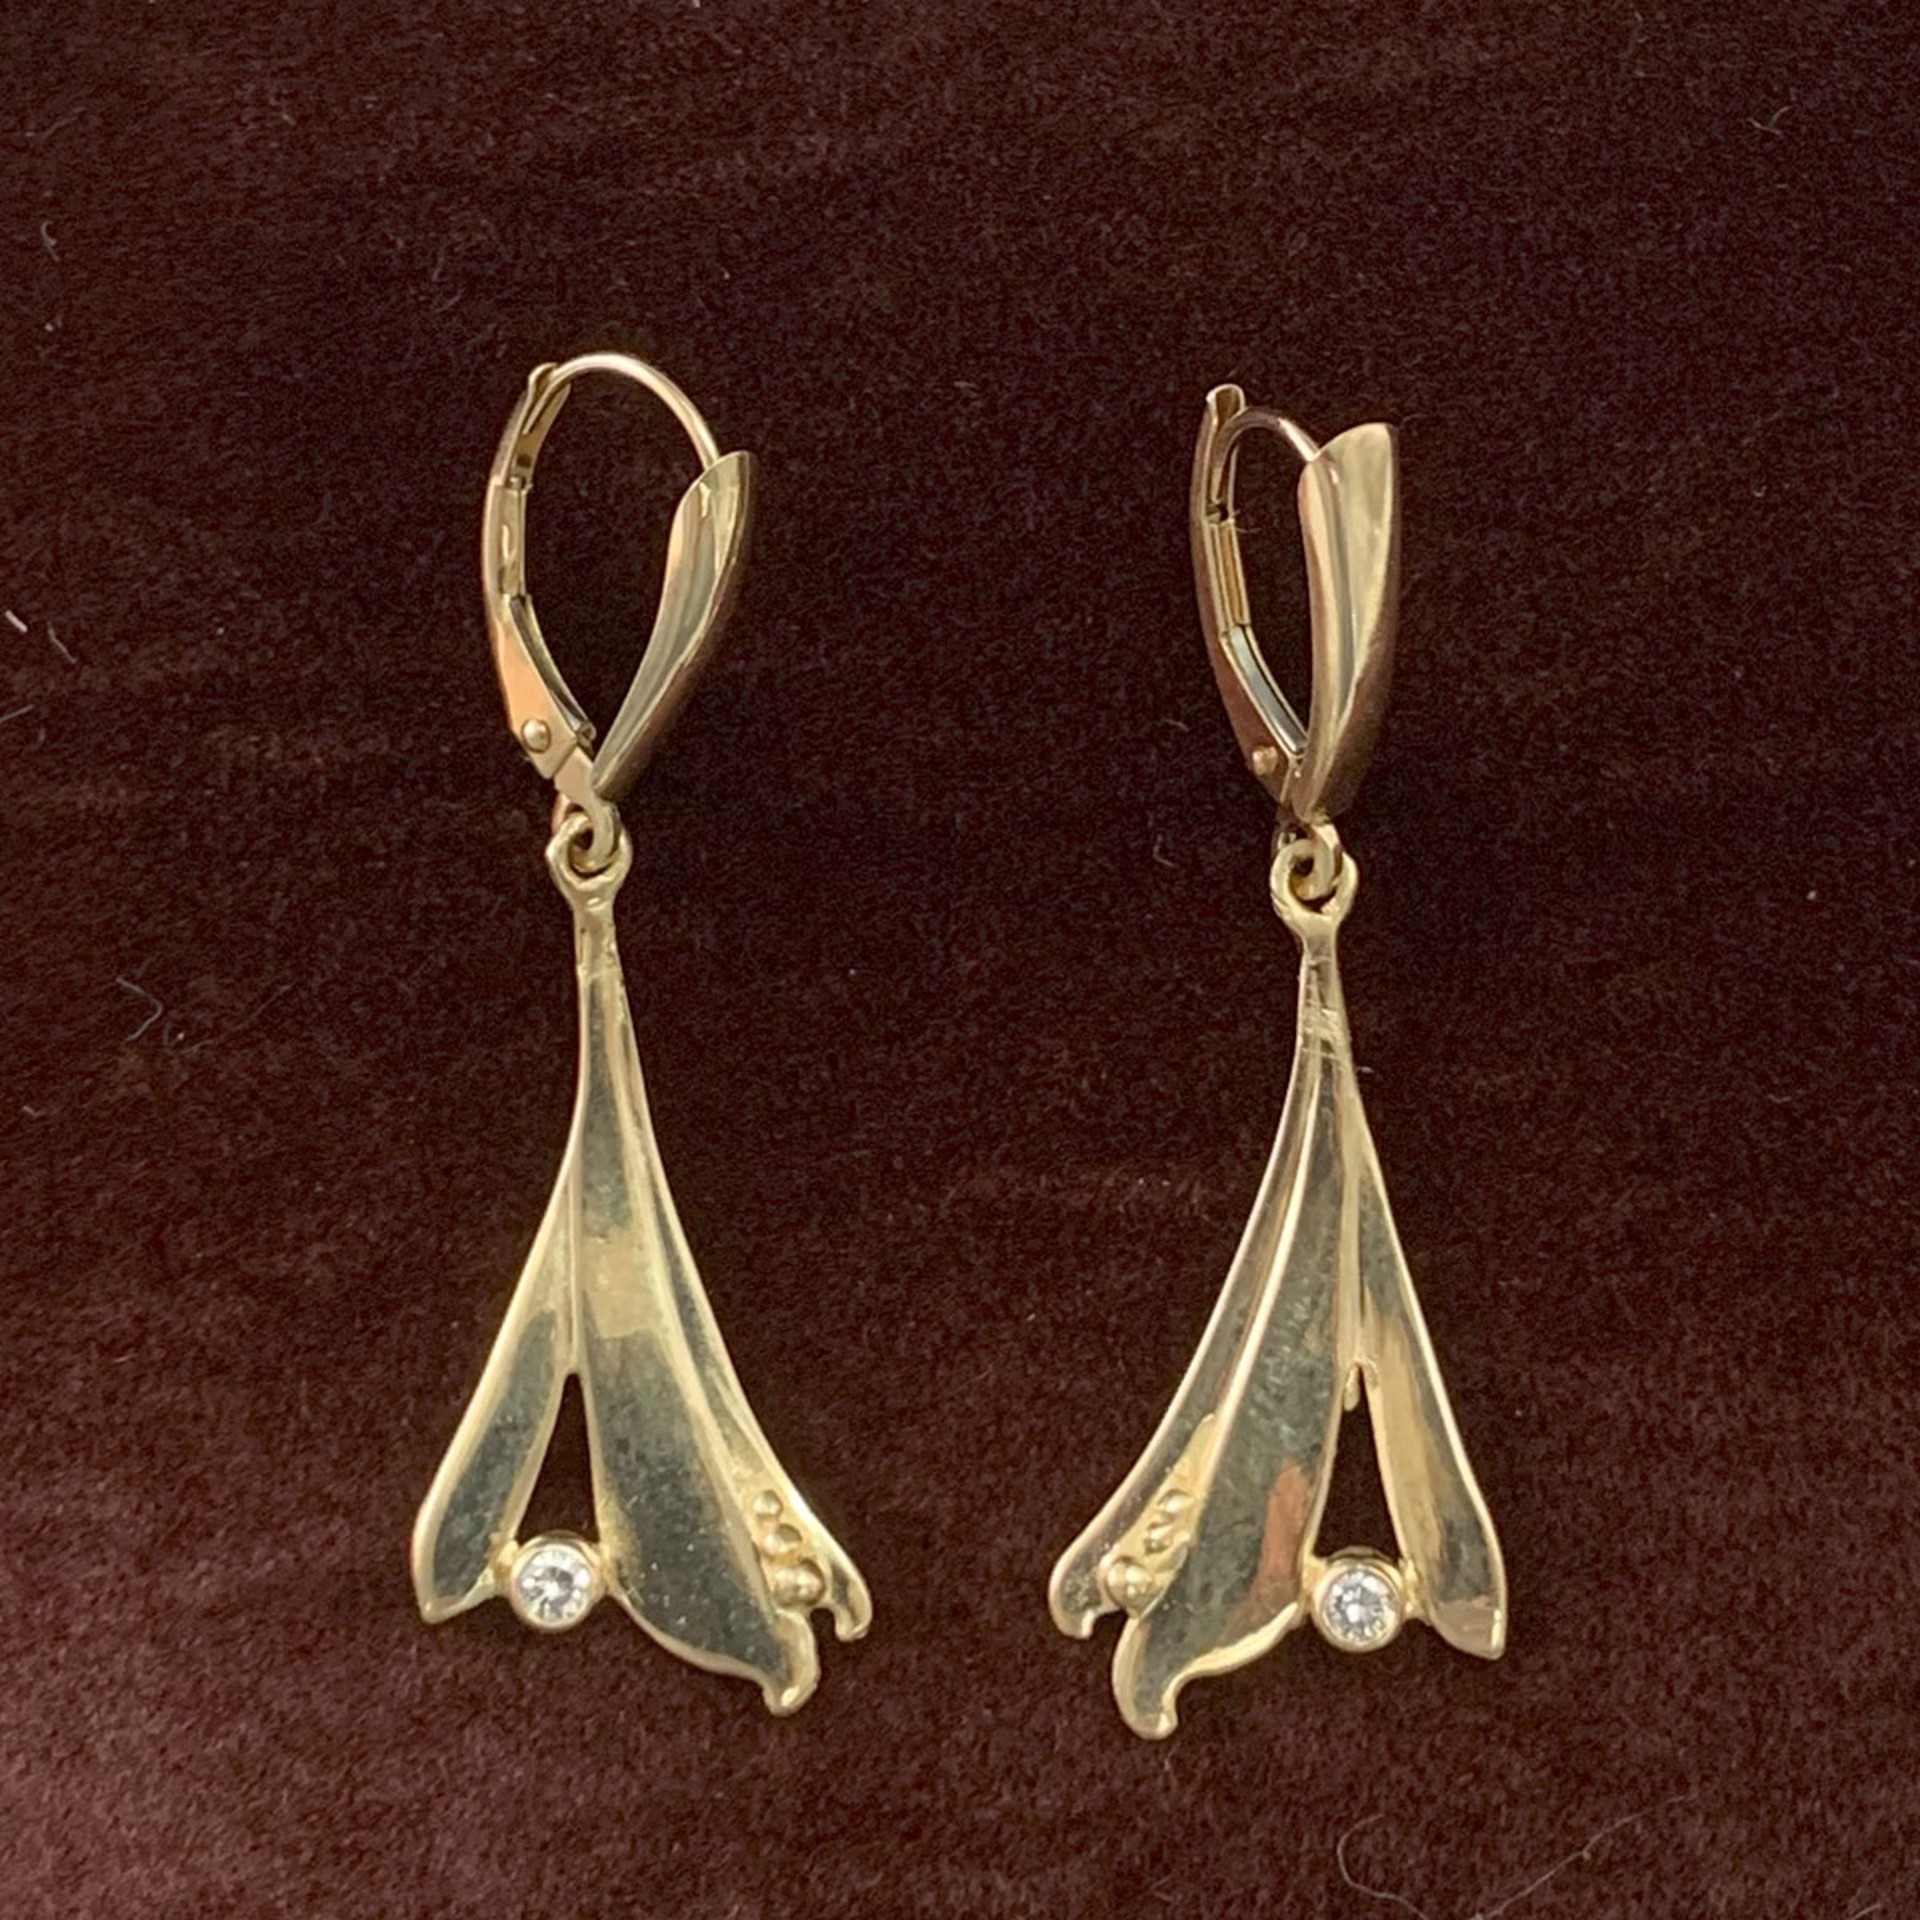 Flaming Iris Leverback Earrings by Sharon Amber